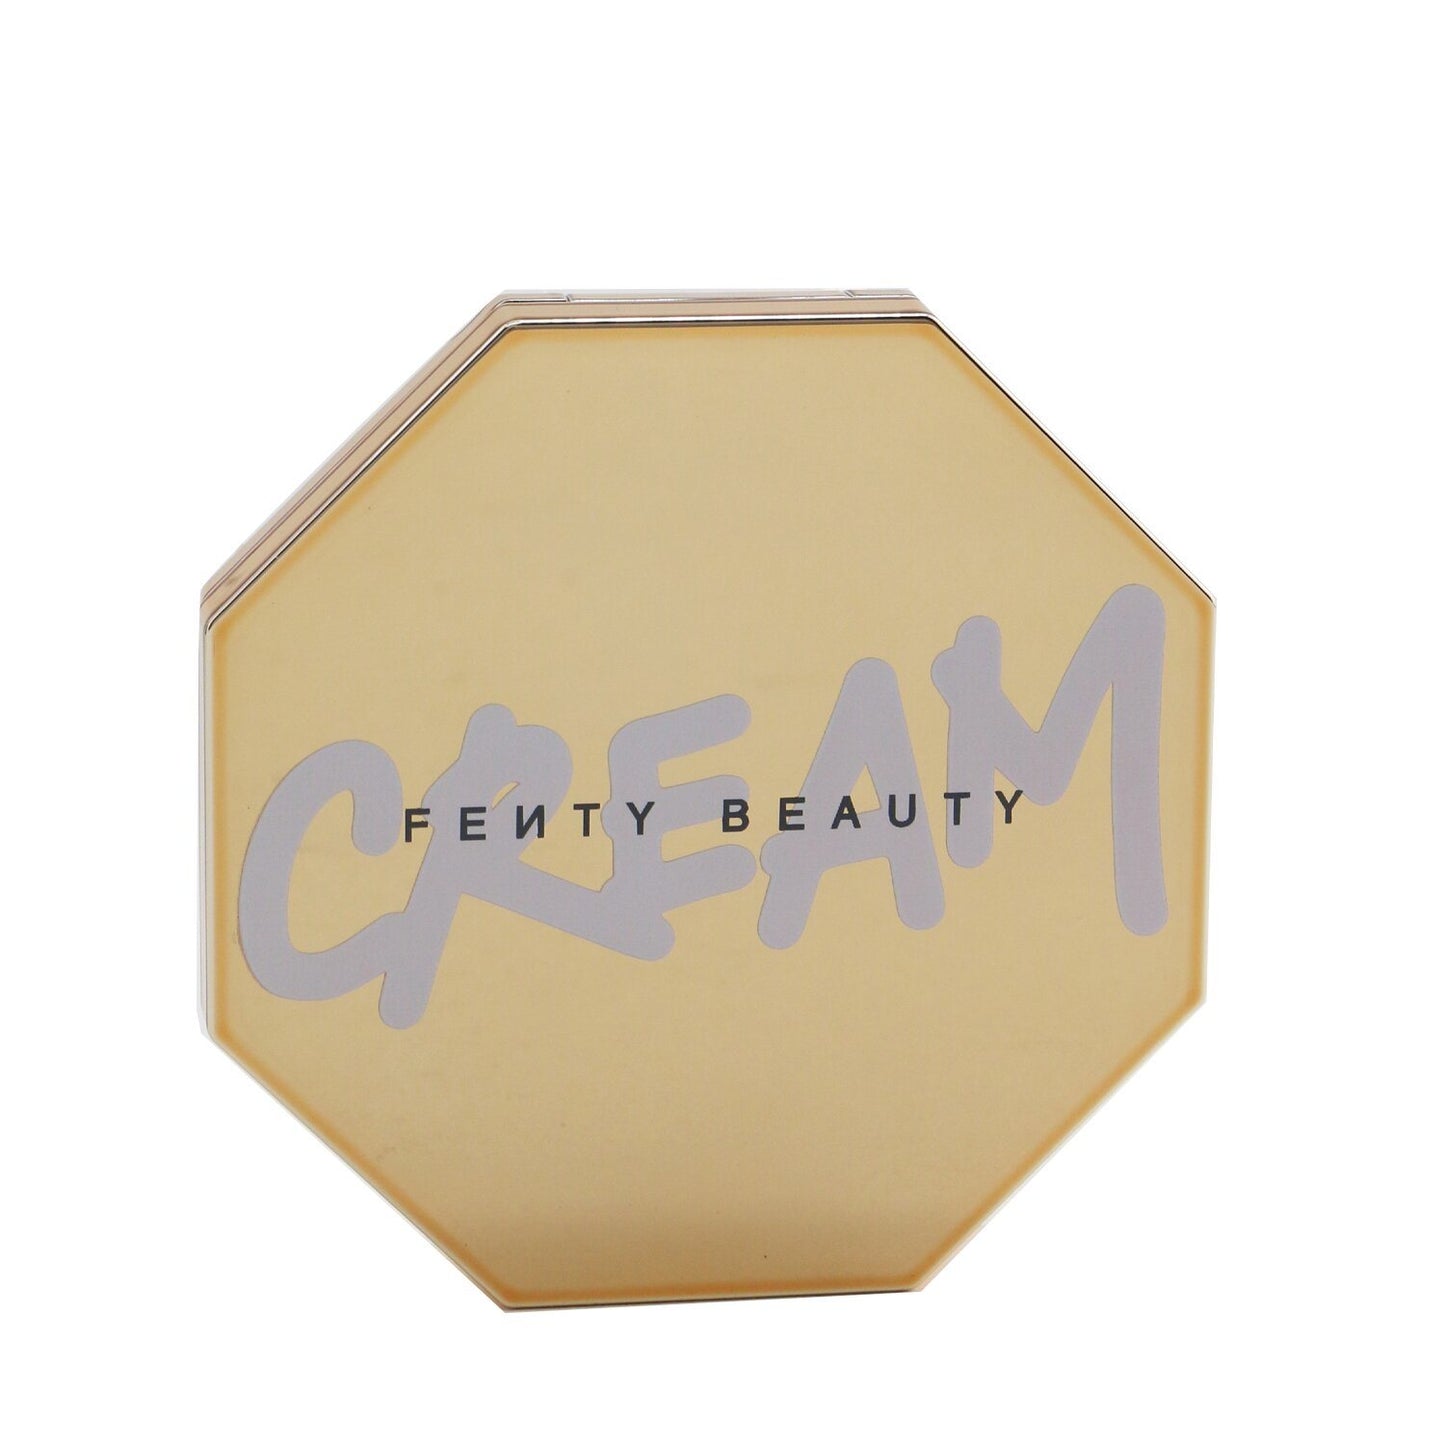 FENTY BEAUTY BY RIHANNA - Cheeks Out Freestyle Cream Bronzer - # 02 Butta Biscuit (Light With Neutral Undertone) 643245 6.23g/0.22oz